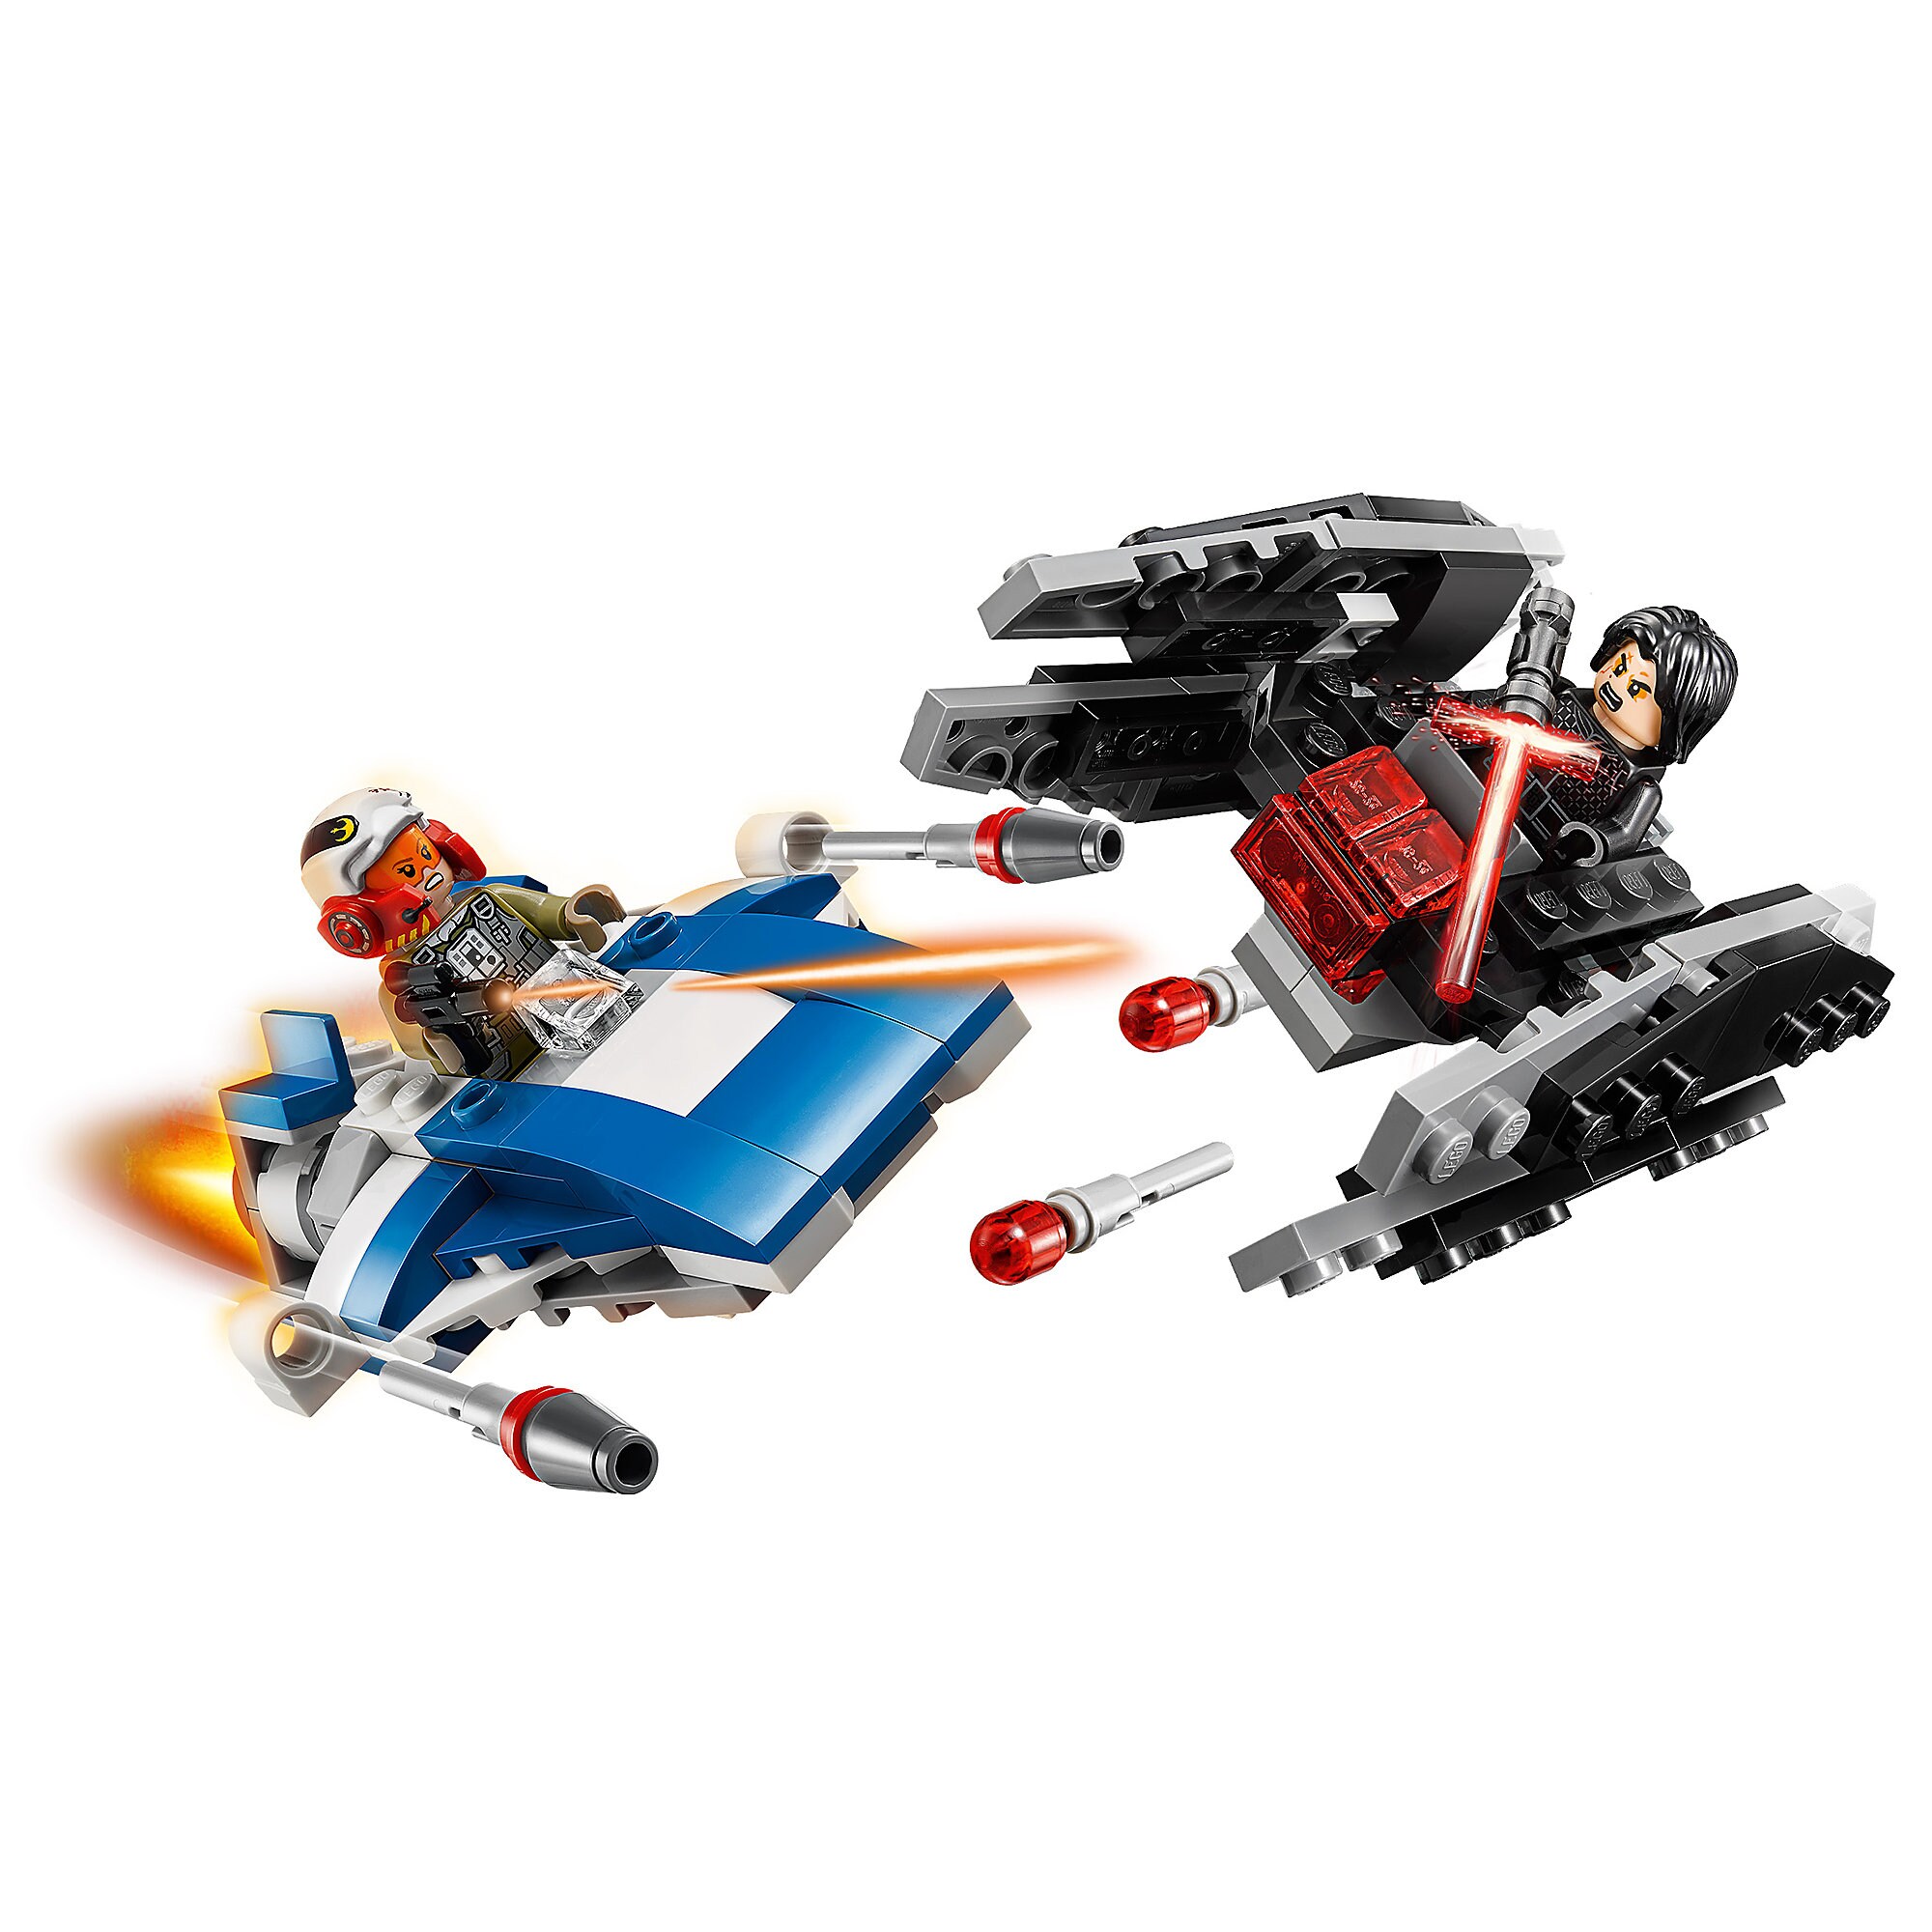 A-Wing vs. TIE Silencer Microfighters Playset by LEGO - Star Wars: The Last Jedi